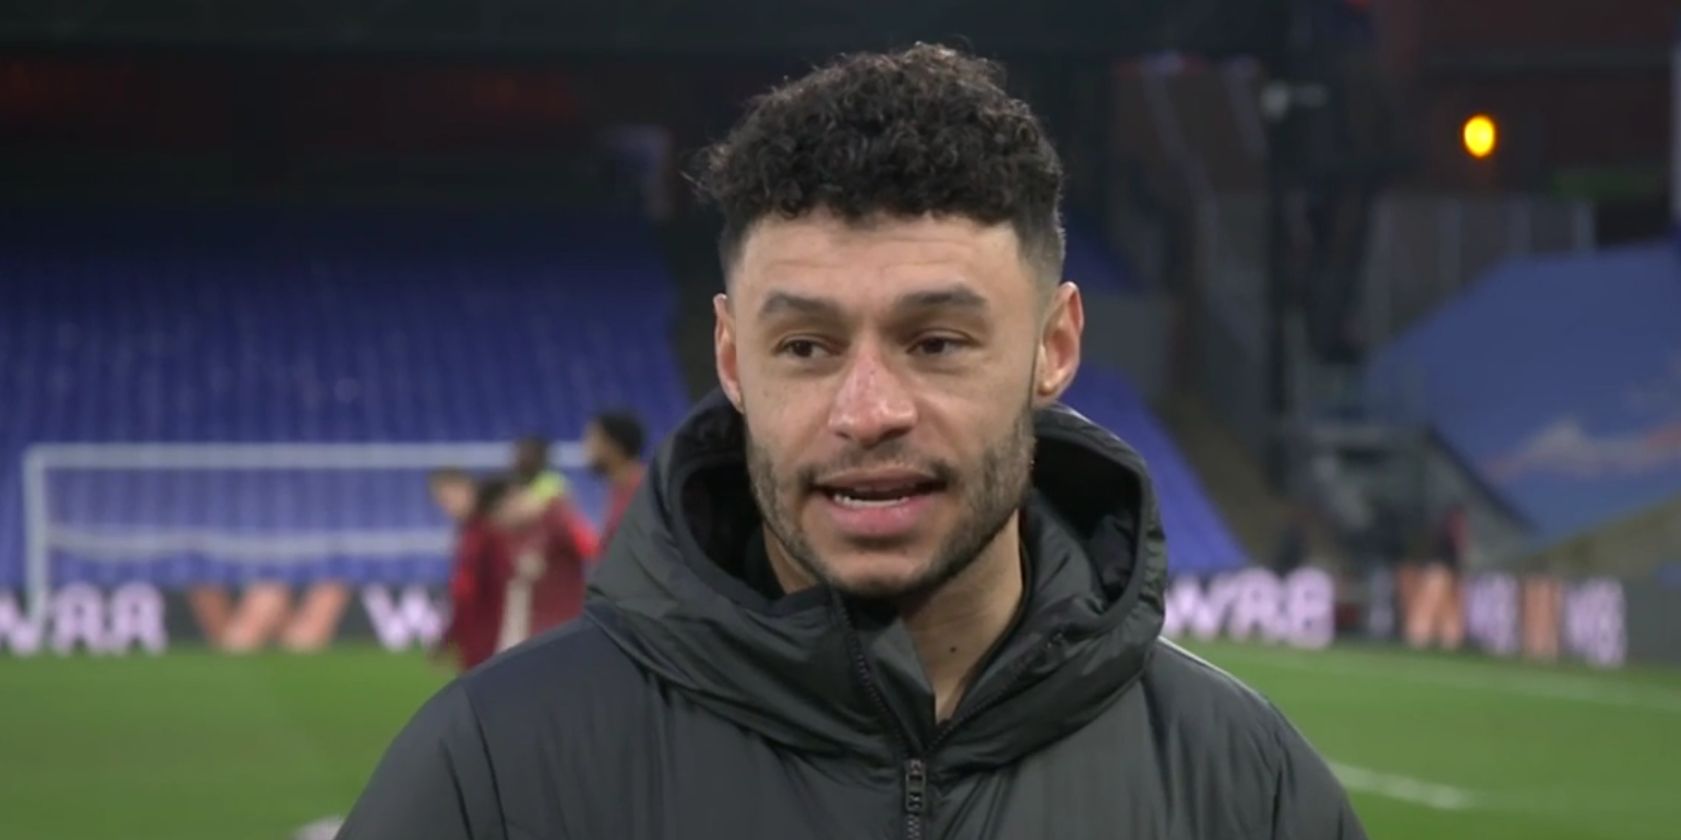 (Video) Alex Oxlade-Chamberlain thanks “world class” Alisson Becker for guiding Liverpool to the three points at Selhurst Park